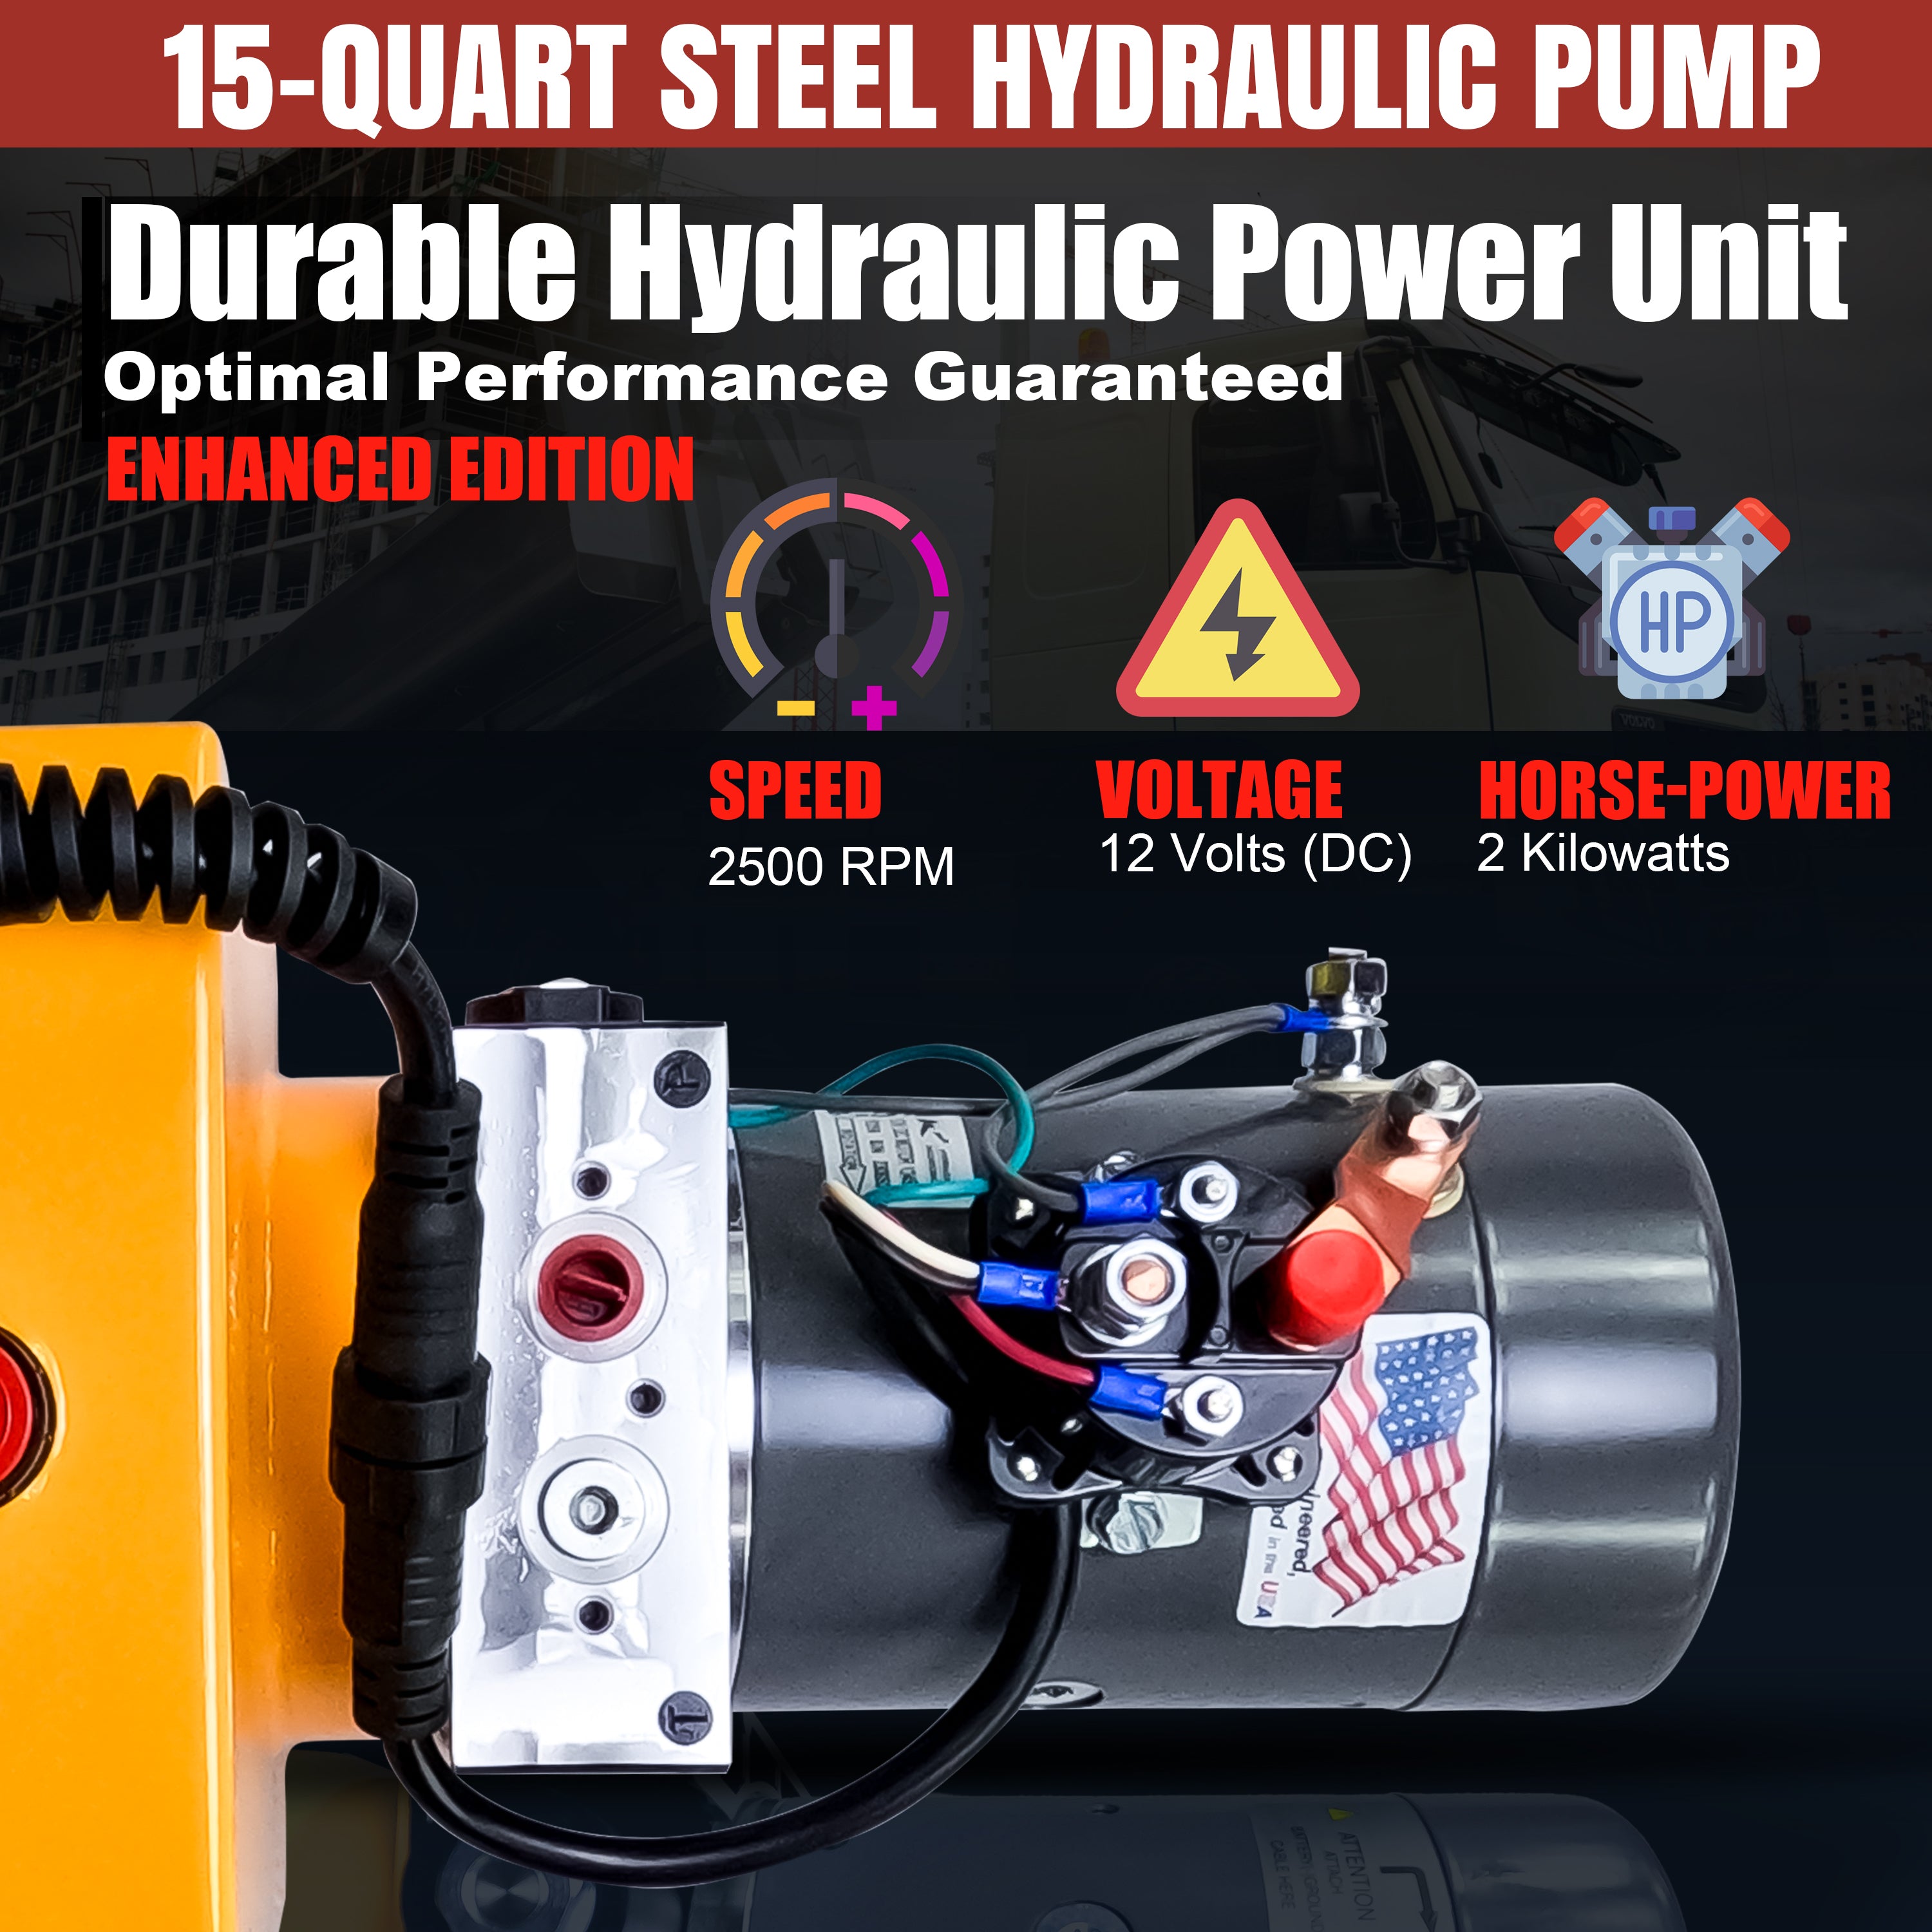 KTI 12V Single-Acting Hydraulic Pump with steel reservoir, featuring a compact, durable design, a yellow safety triangle, and control gauges for efficient dump bed operations.